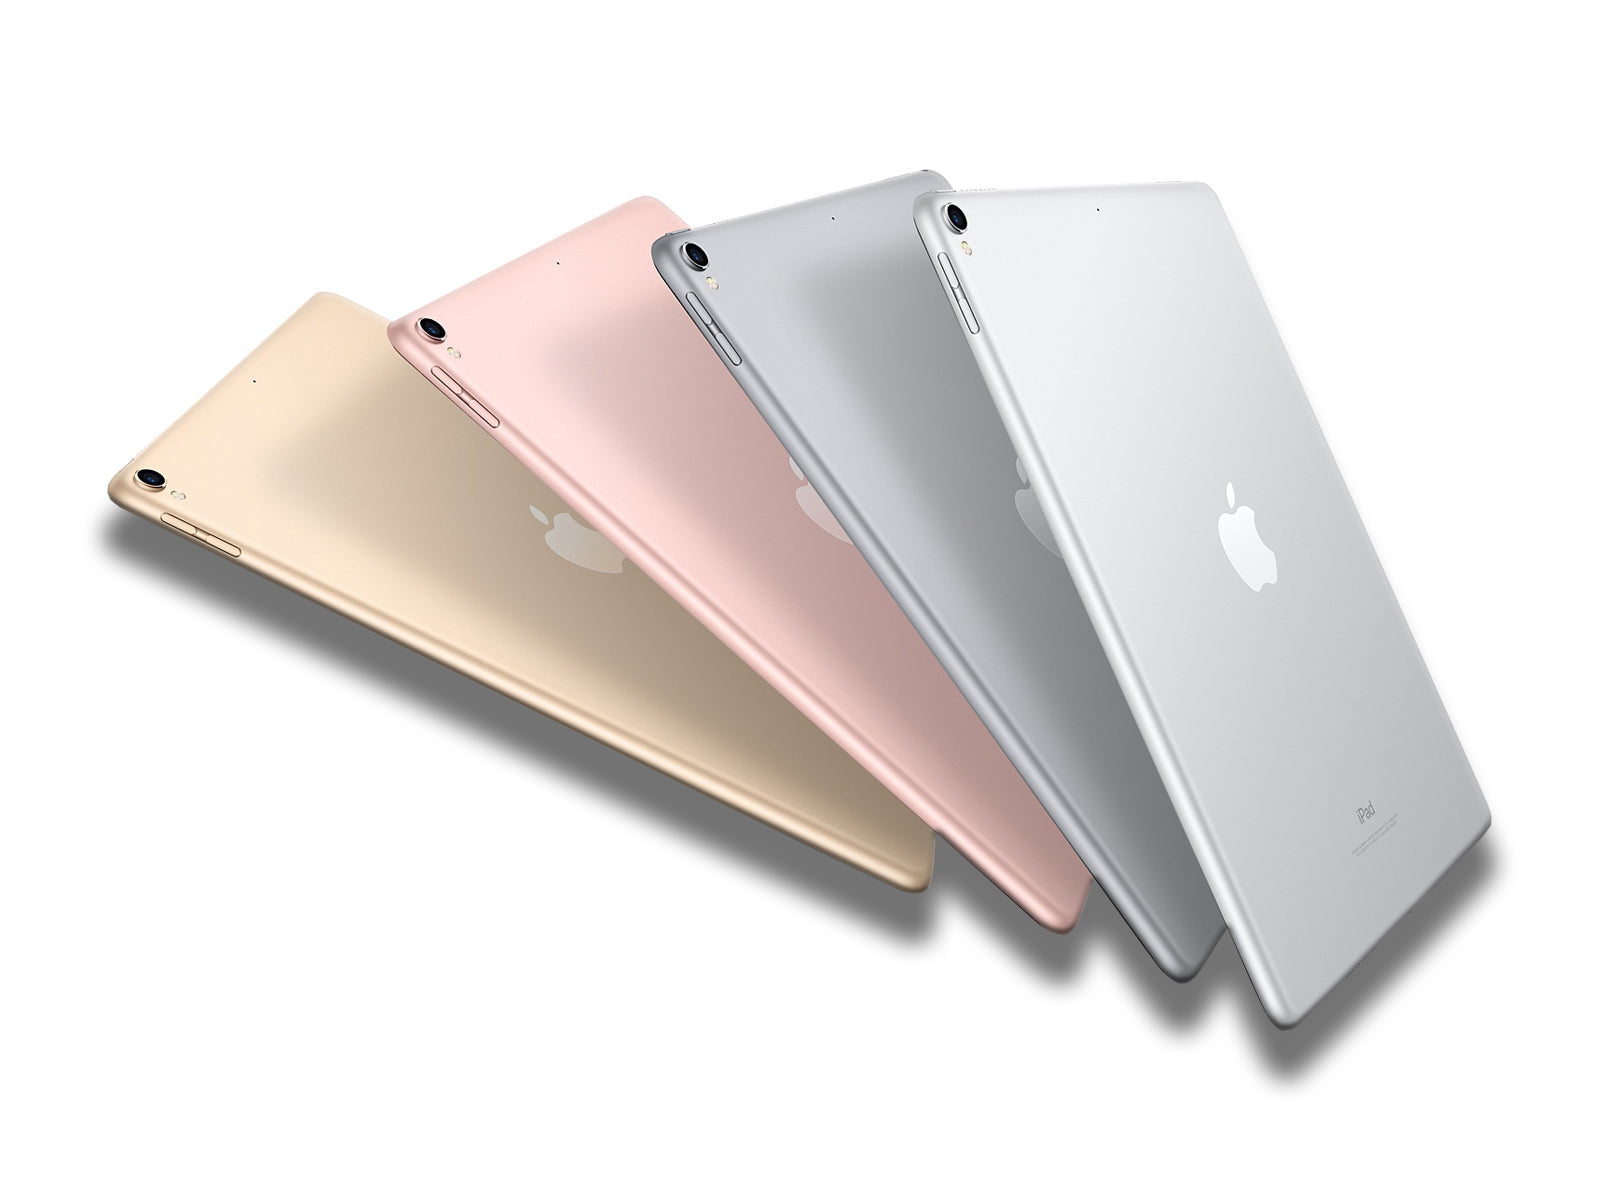 Apple iPad Pro 9.7" In Gold, Rose Gold, Silver And Grey Back